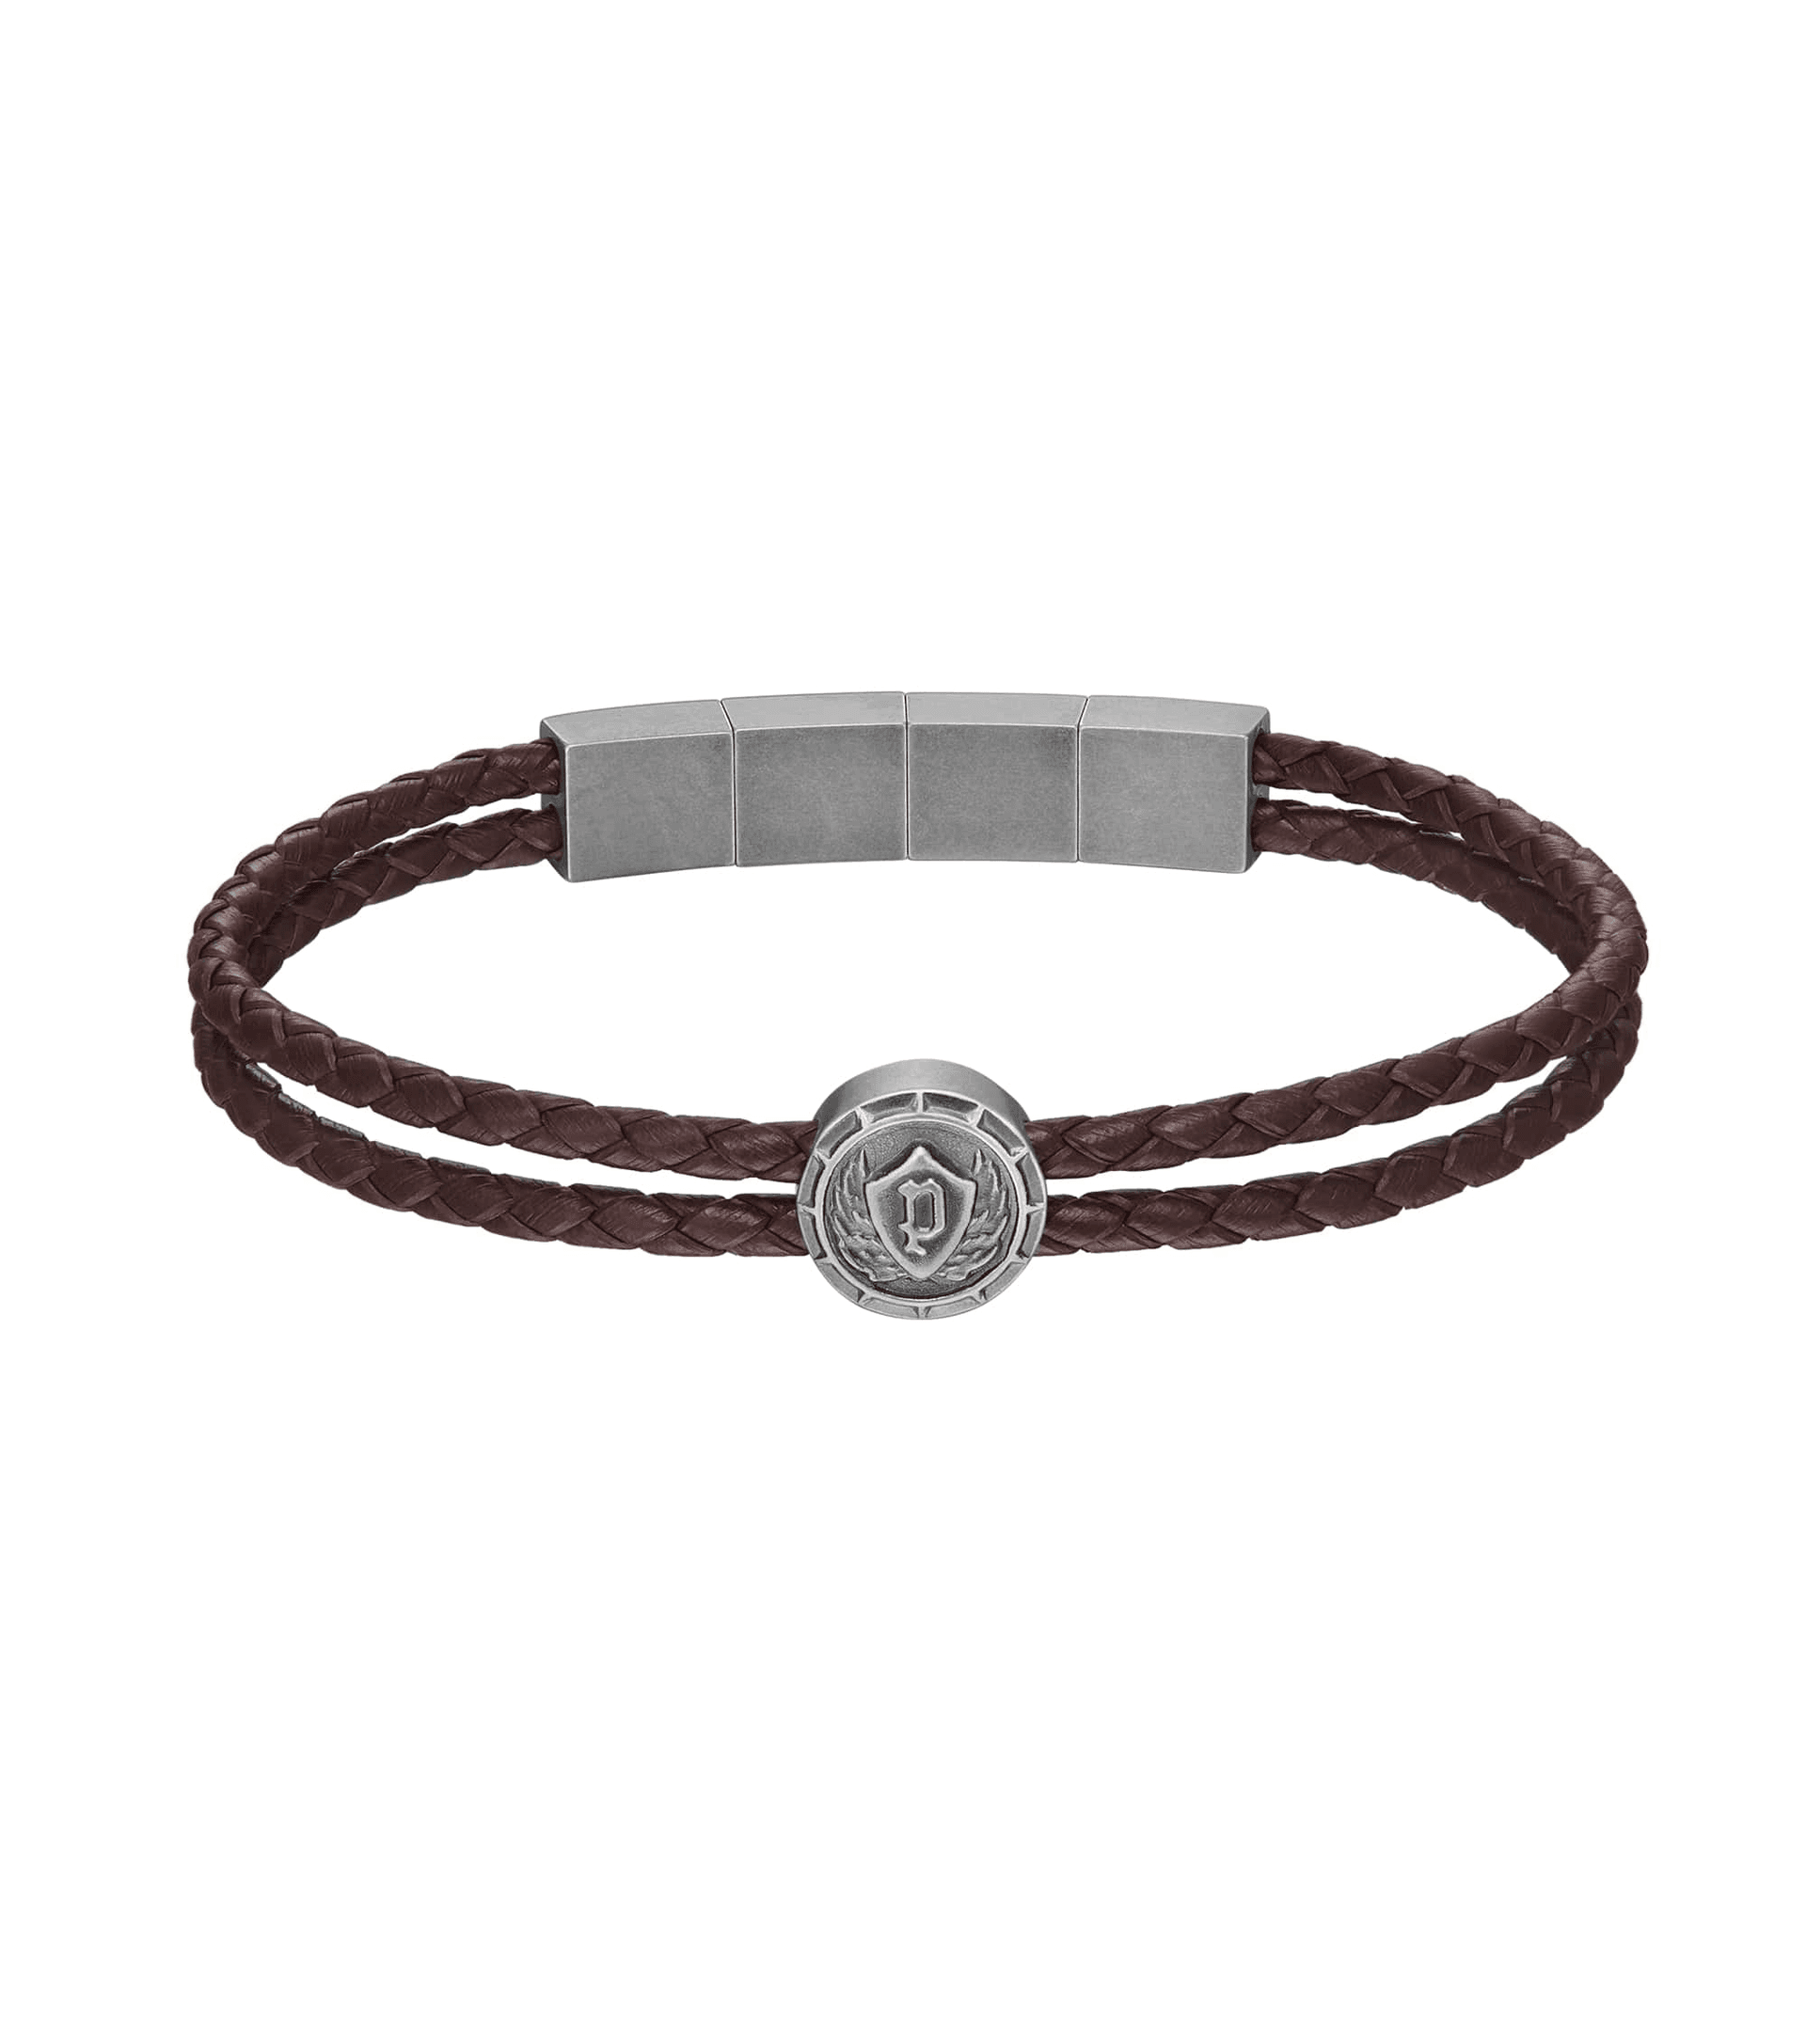 Gucci Anger Forest Wolf Head Leather Wrap Bracelet - Sterling Silver Wrap,  Bracelets - GUC705003 | The RealReal